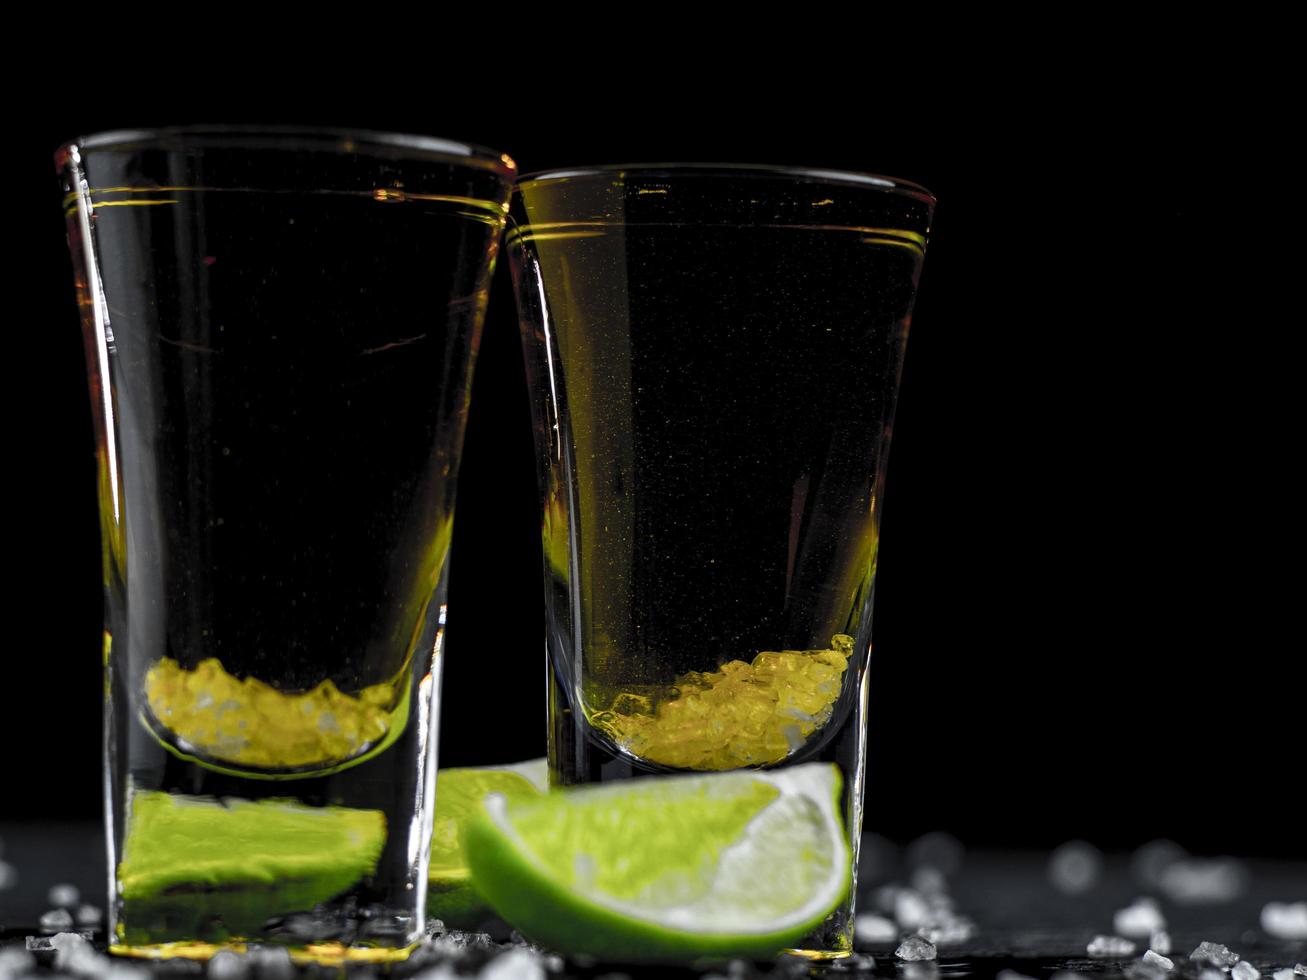 Two shots tequila gold with juicy lime and sea salt photo